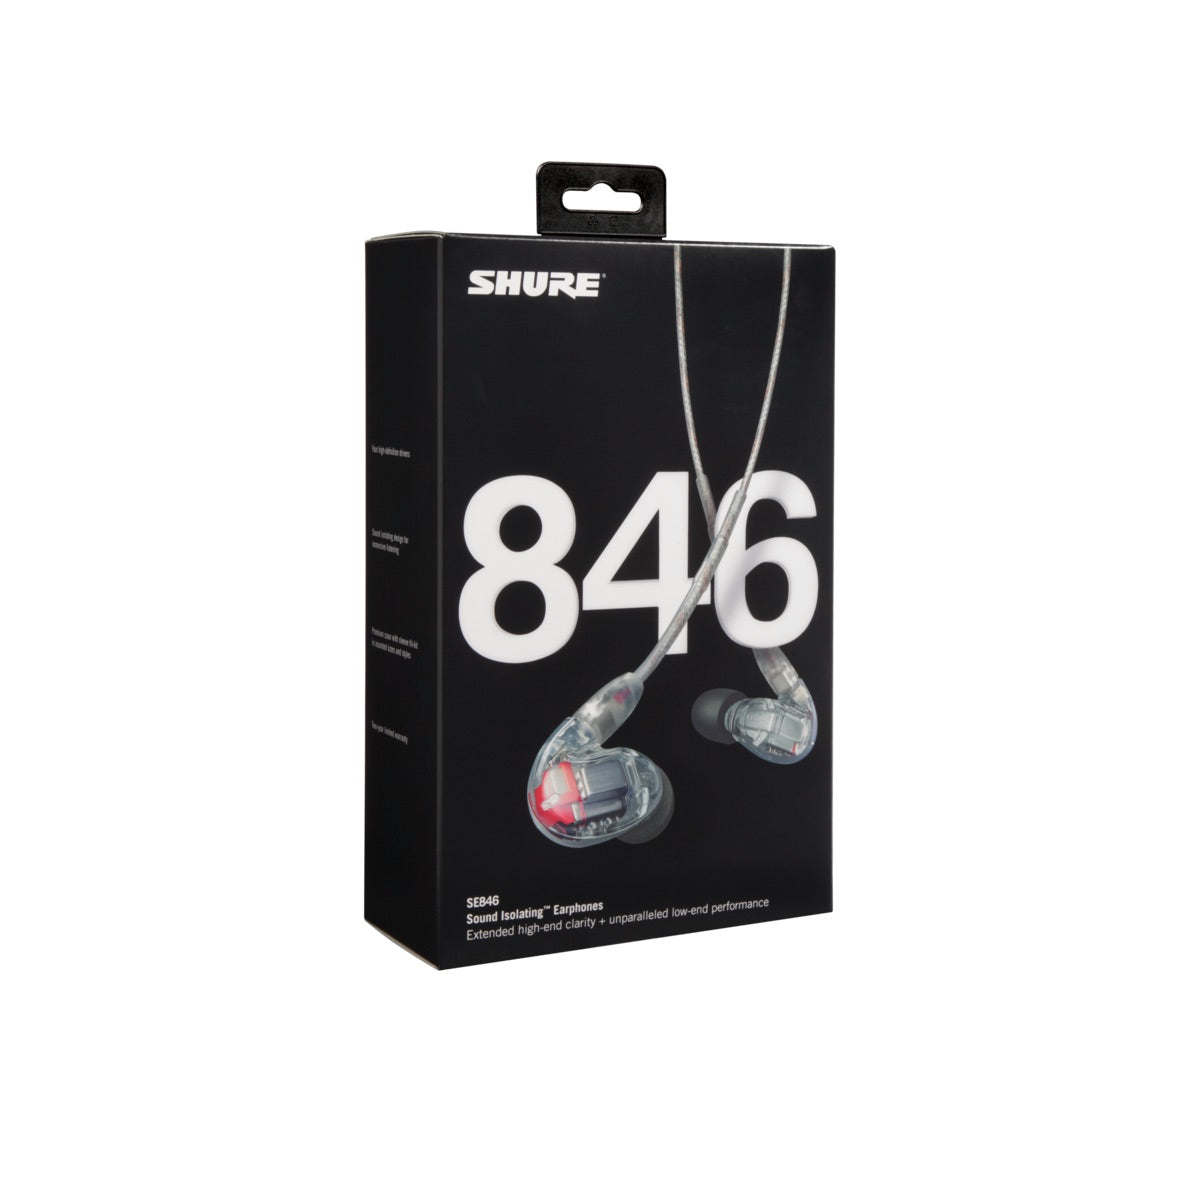 Shure SE846-CL - Professional Sound Isolating Earphones, Clear, box